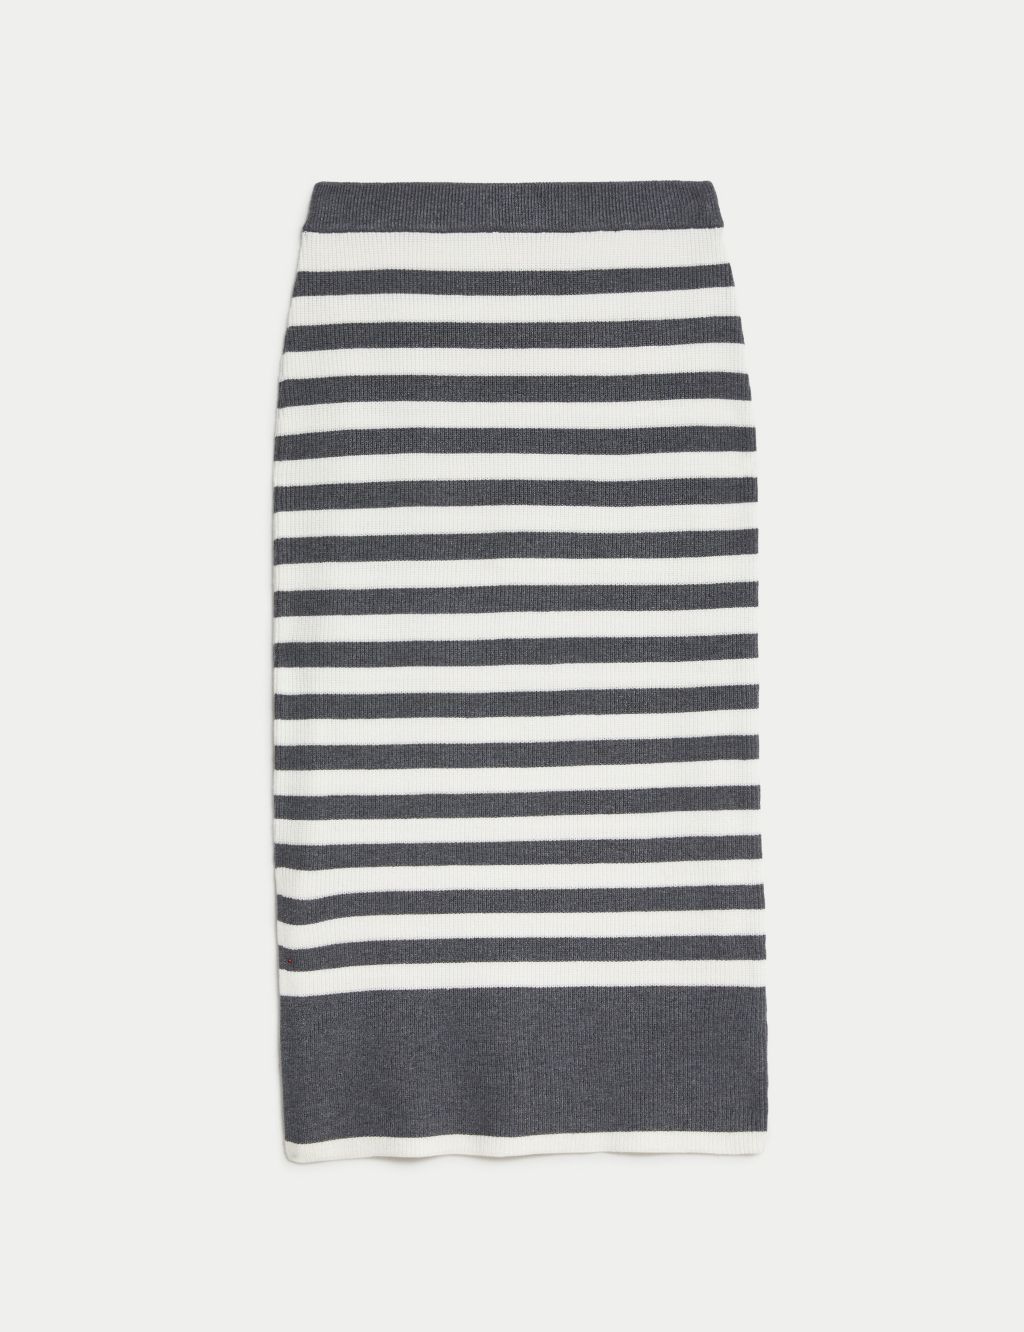 Striped Knitted Midi Skirt image 2